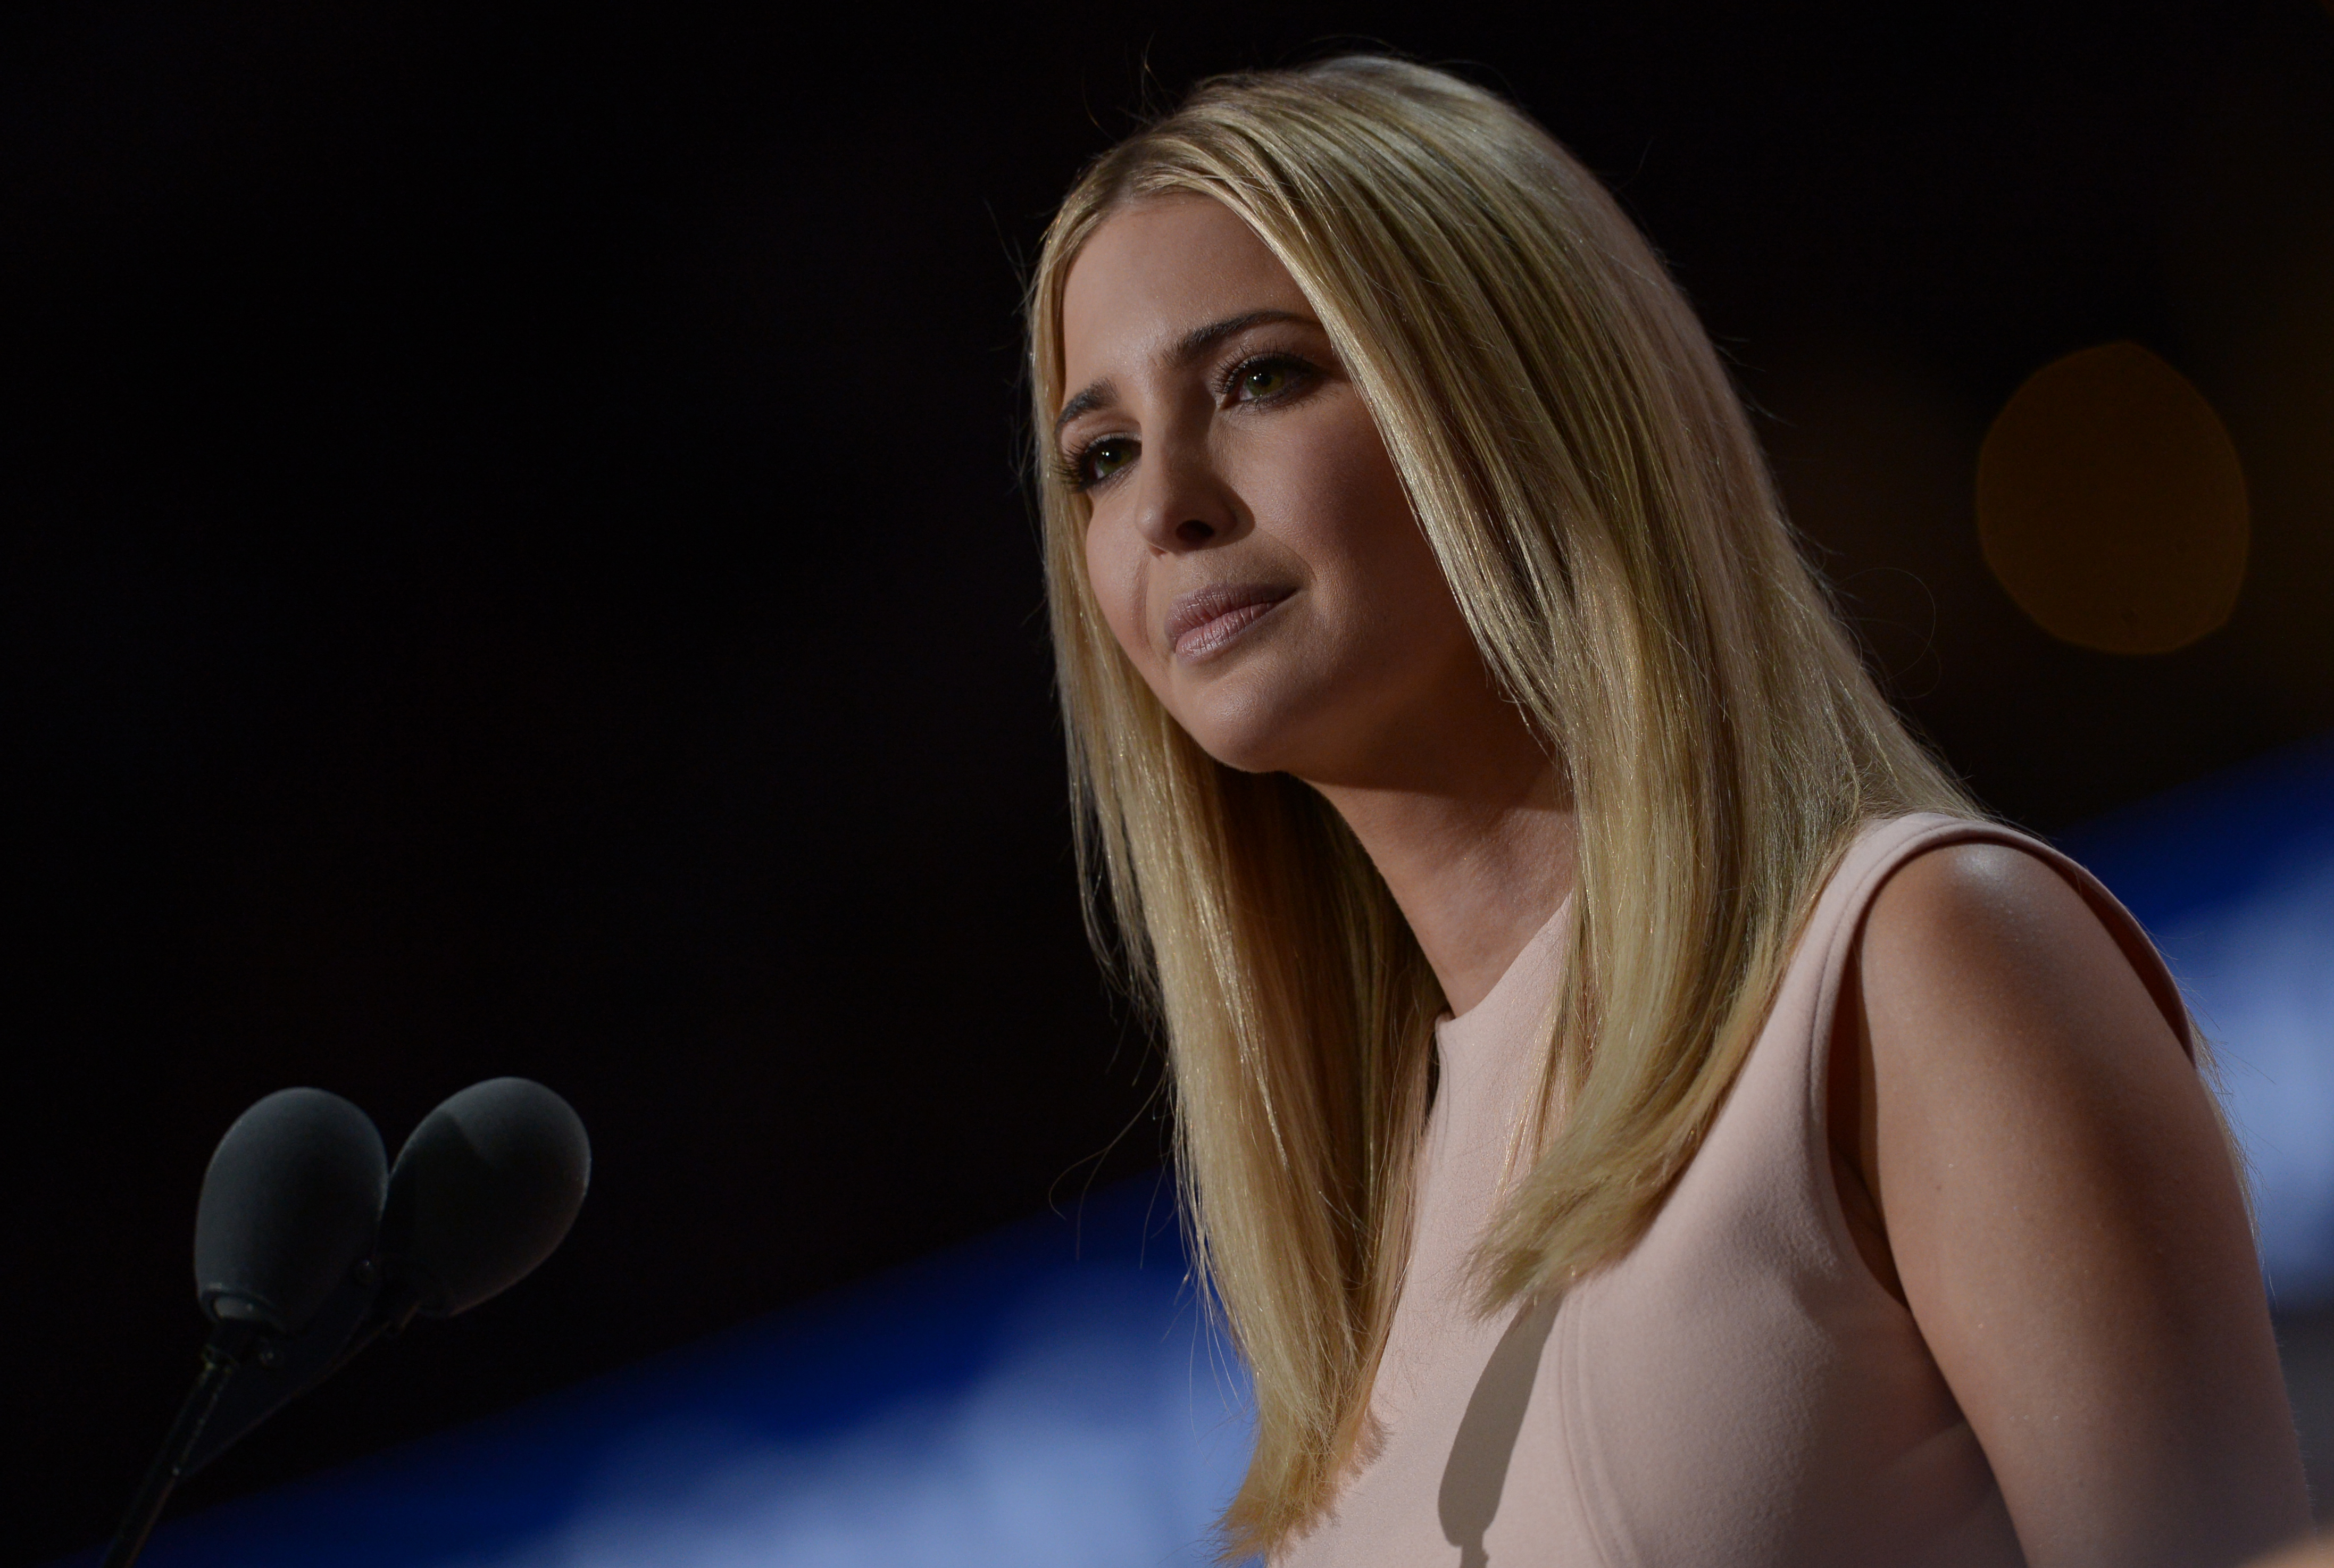 Ivanka Trump speaks on the last day of the Republican National Convention on July 21, 2016, in Cleveland, Ohio. / AFP PHOTO / Brendan SMIALOWSKI